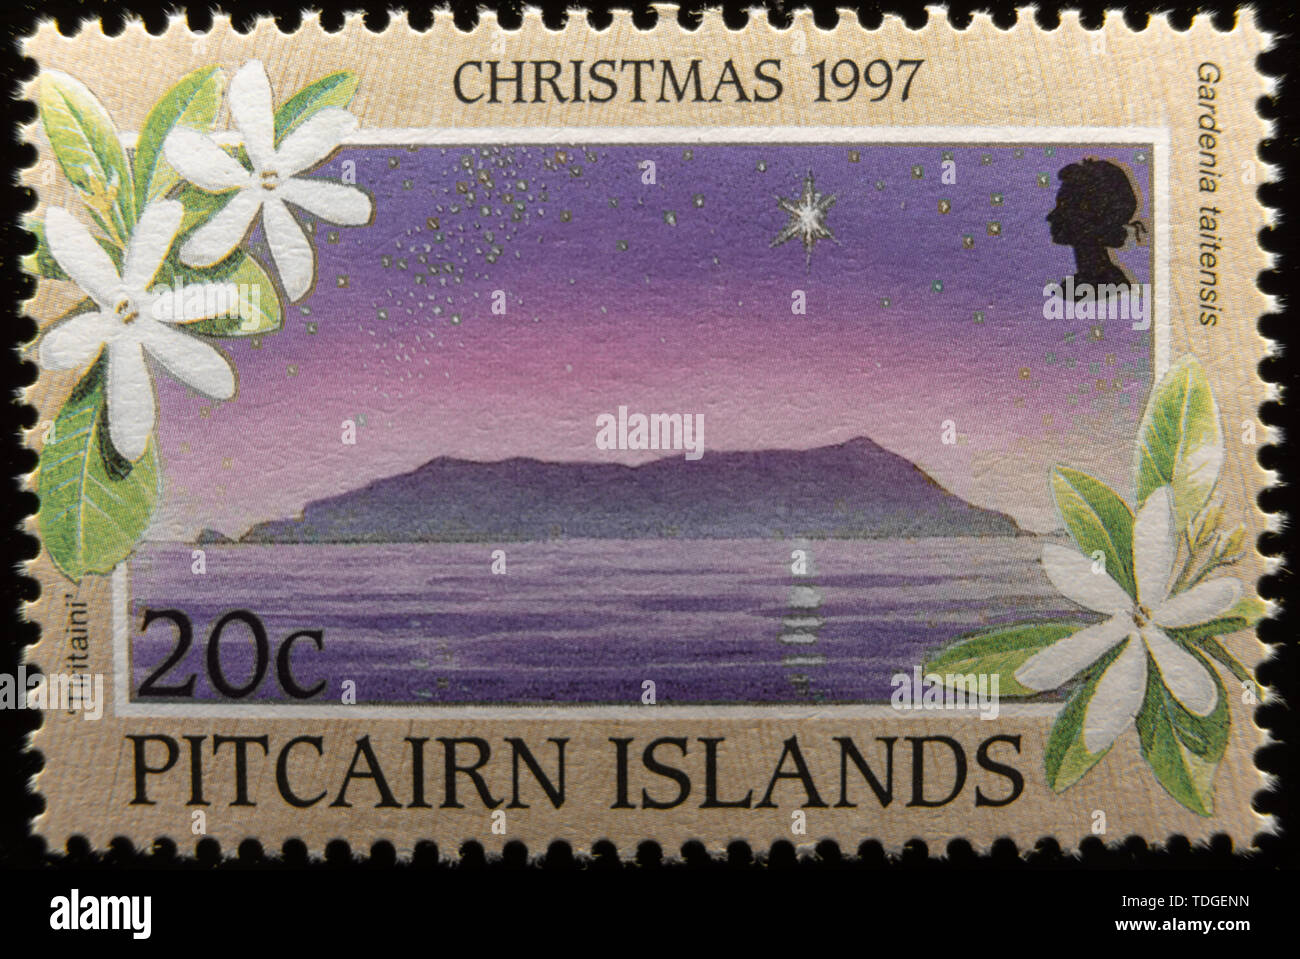 A macro image of a commemorative Pitcairn Islands 20c Christmas 1997 postage stamp. Stock Photo